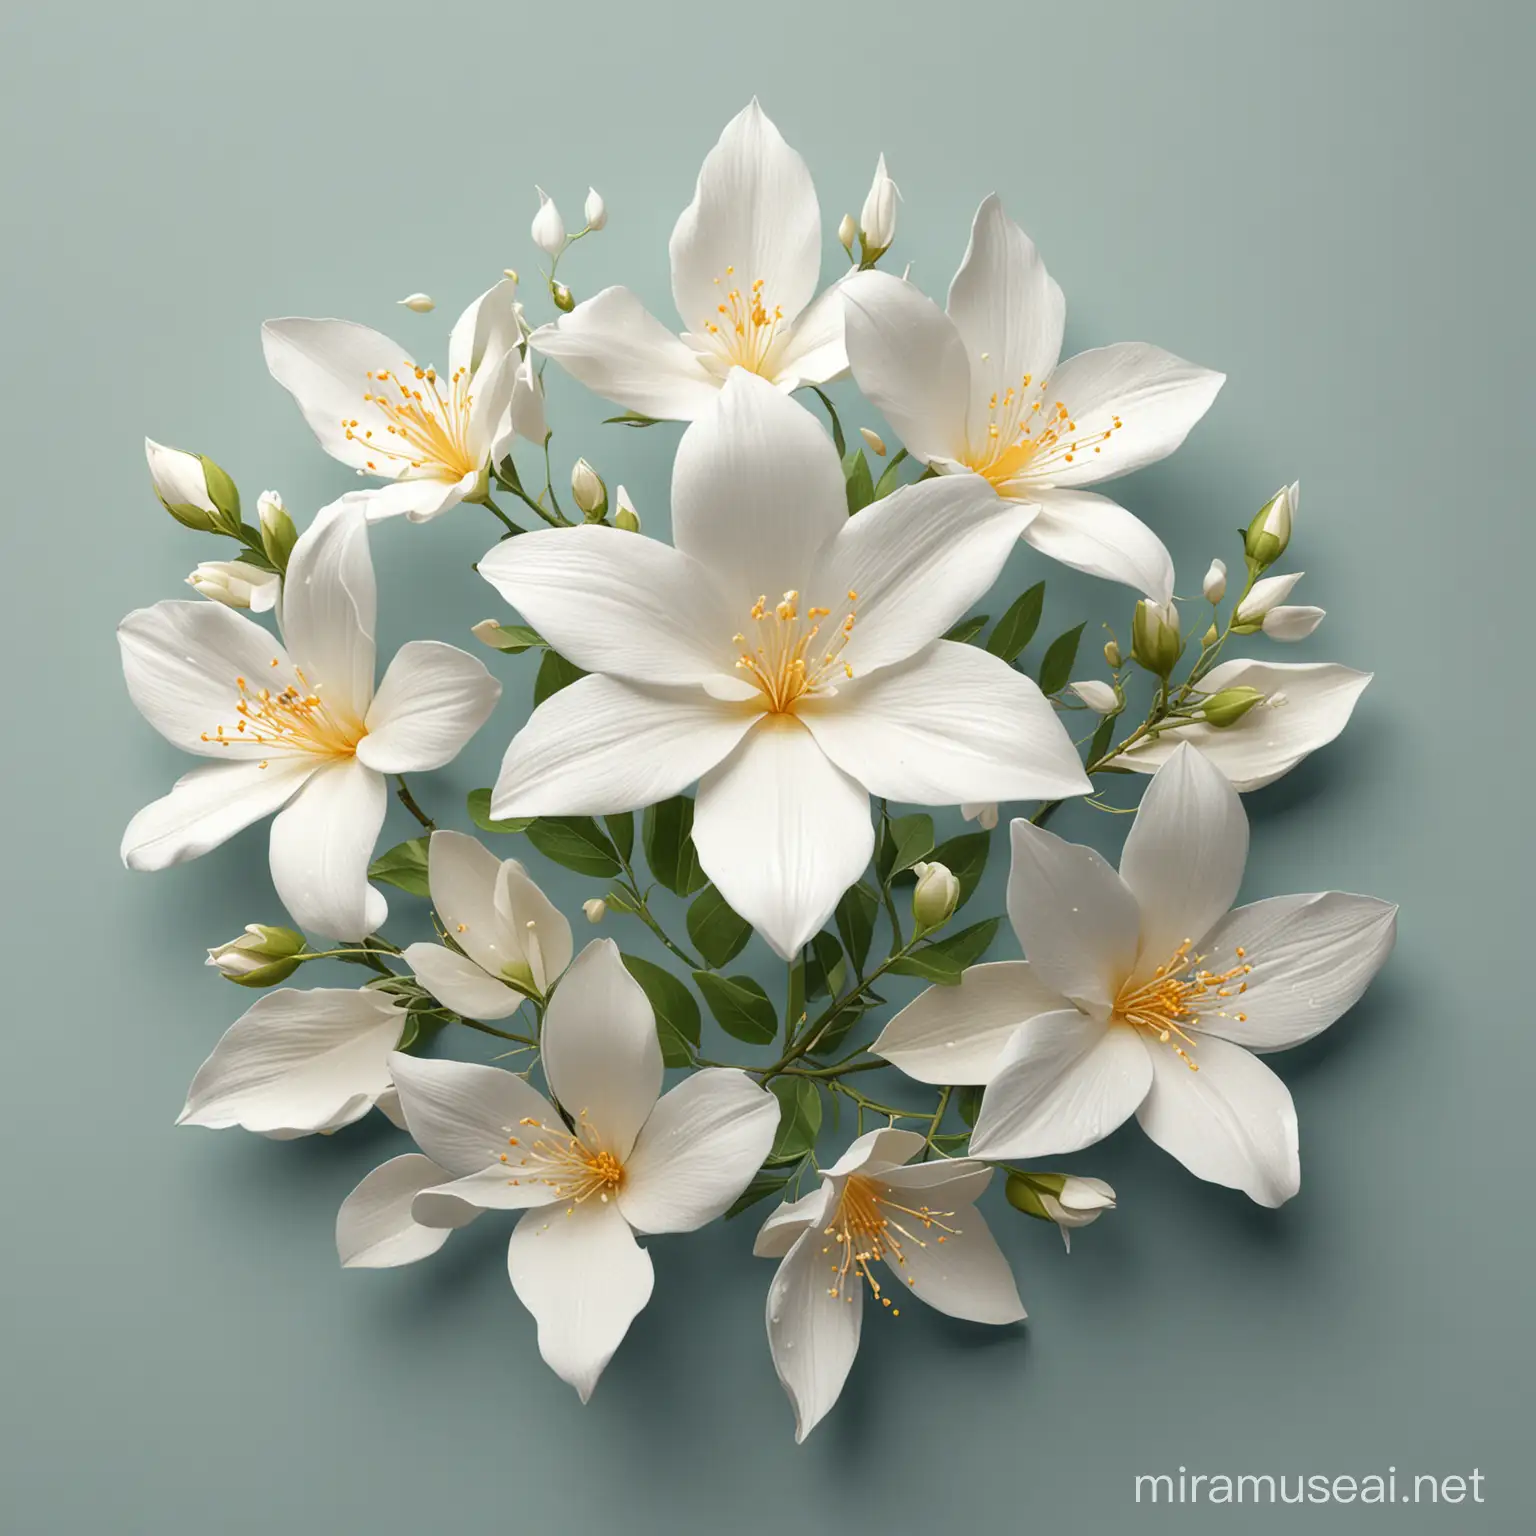 Exquisite Jasmine Flowers with Sharp Details on Smooth Background